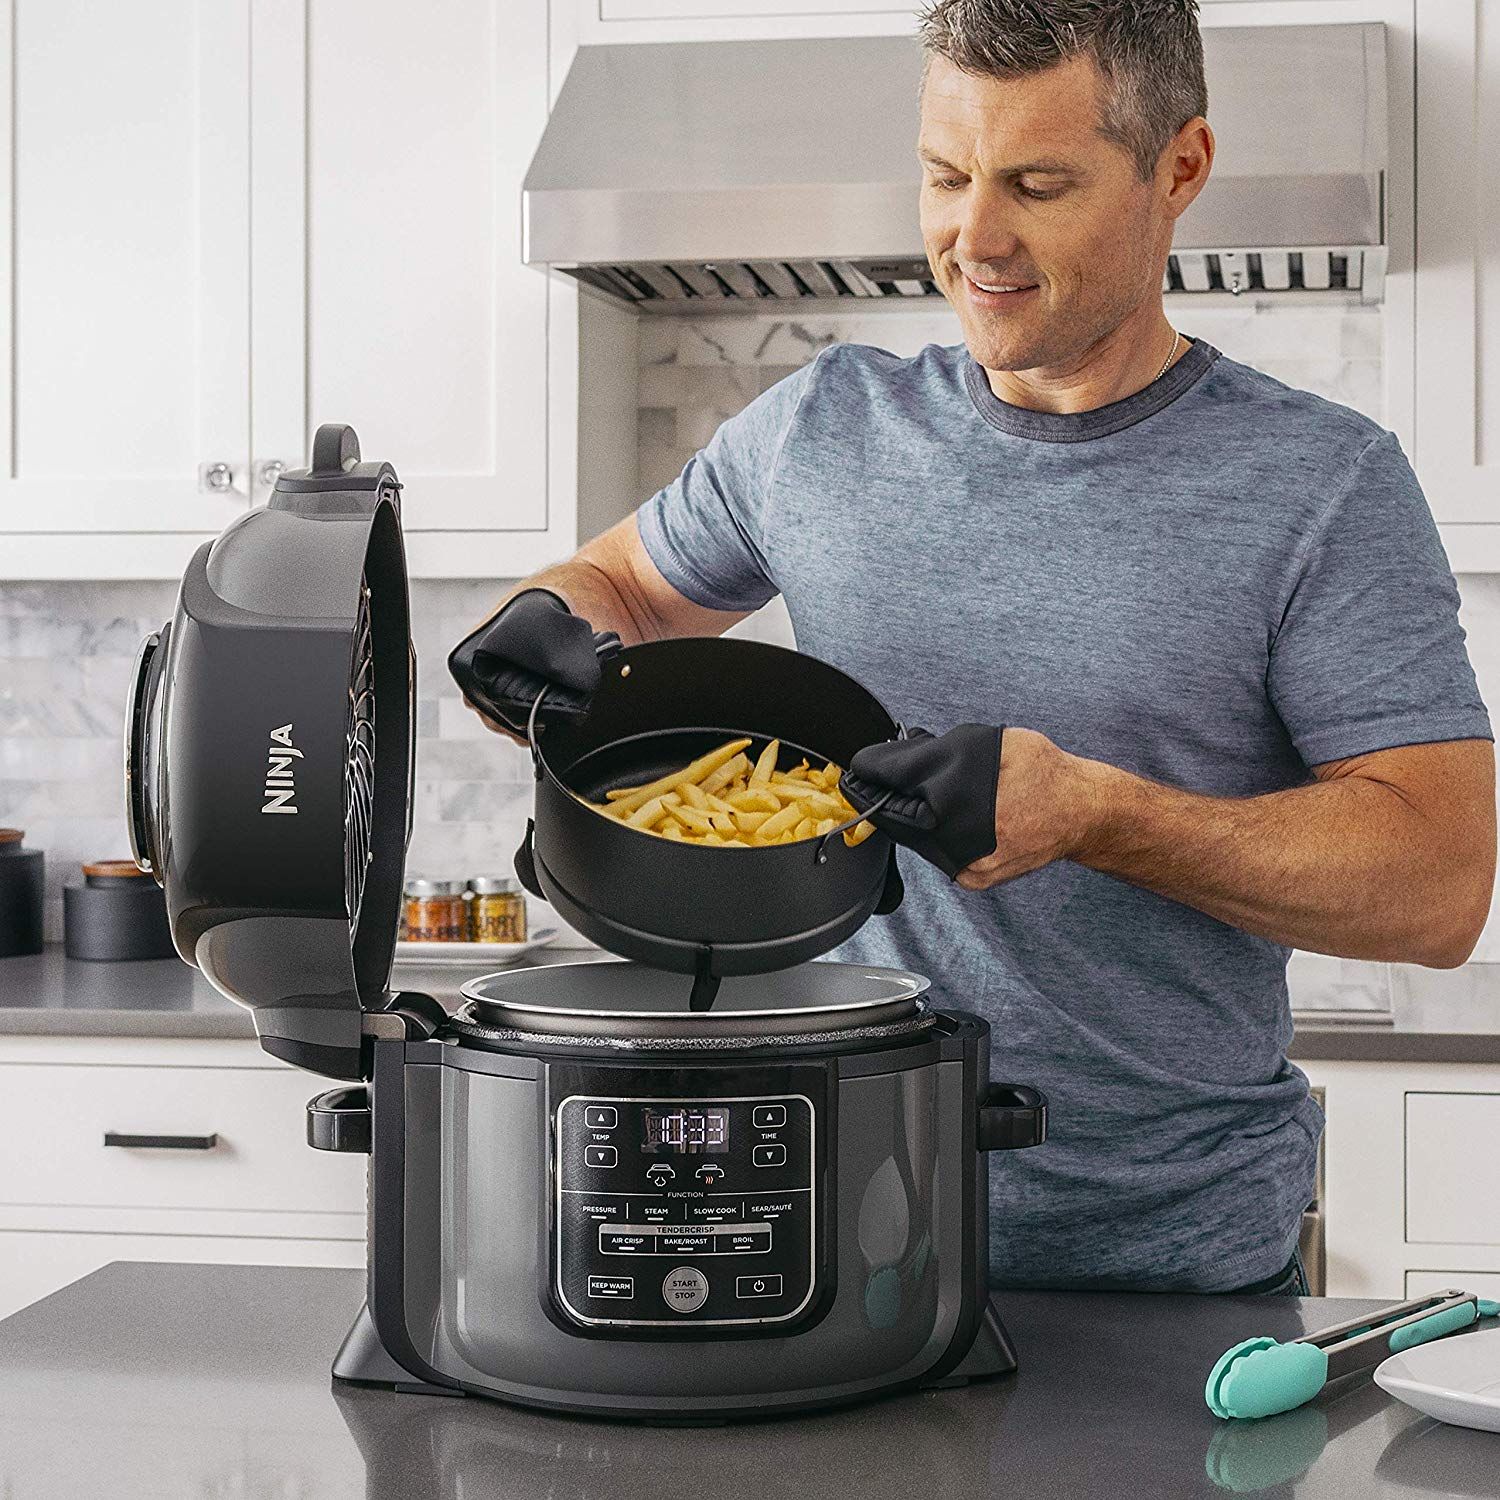 Prime Day deals still available: Shop Ninja, Instant Pot, and more